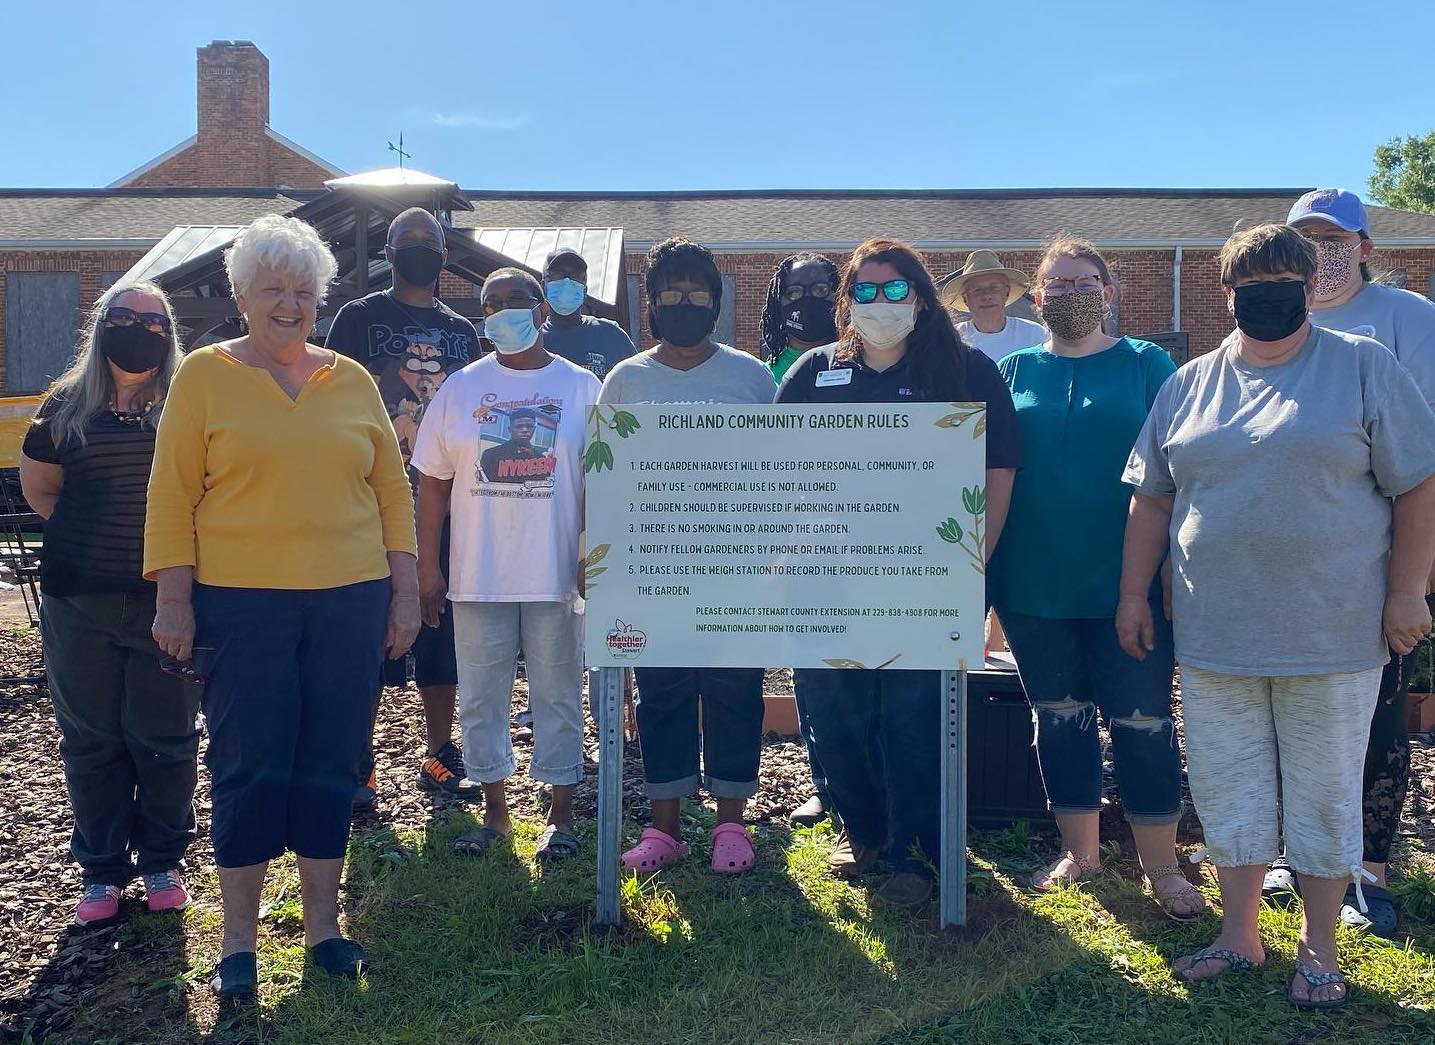 Healthier Together hosted a community-wide planting day at Richland Community Garden in Richland, Georgia, southeast of Columbus.